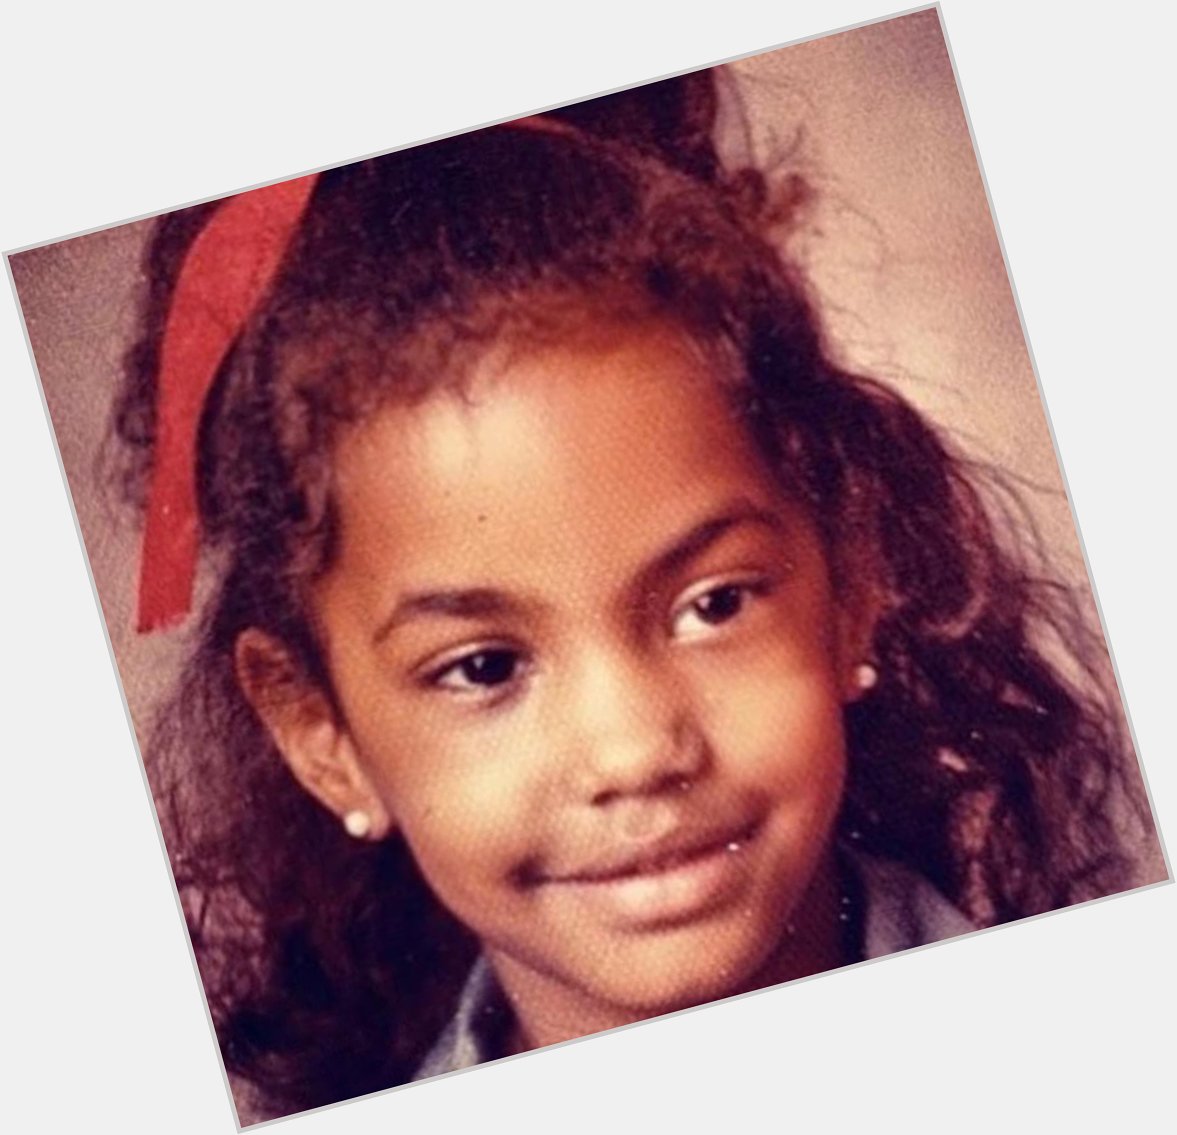 Happy Birthday to Kim Porter. Today she would have turned 51 years old. RIP 